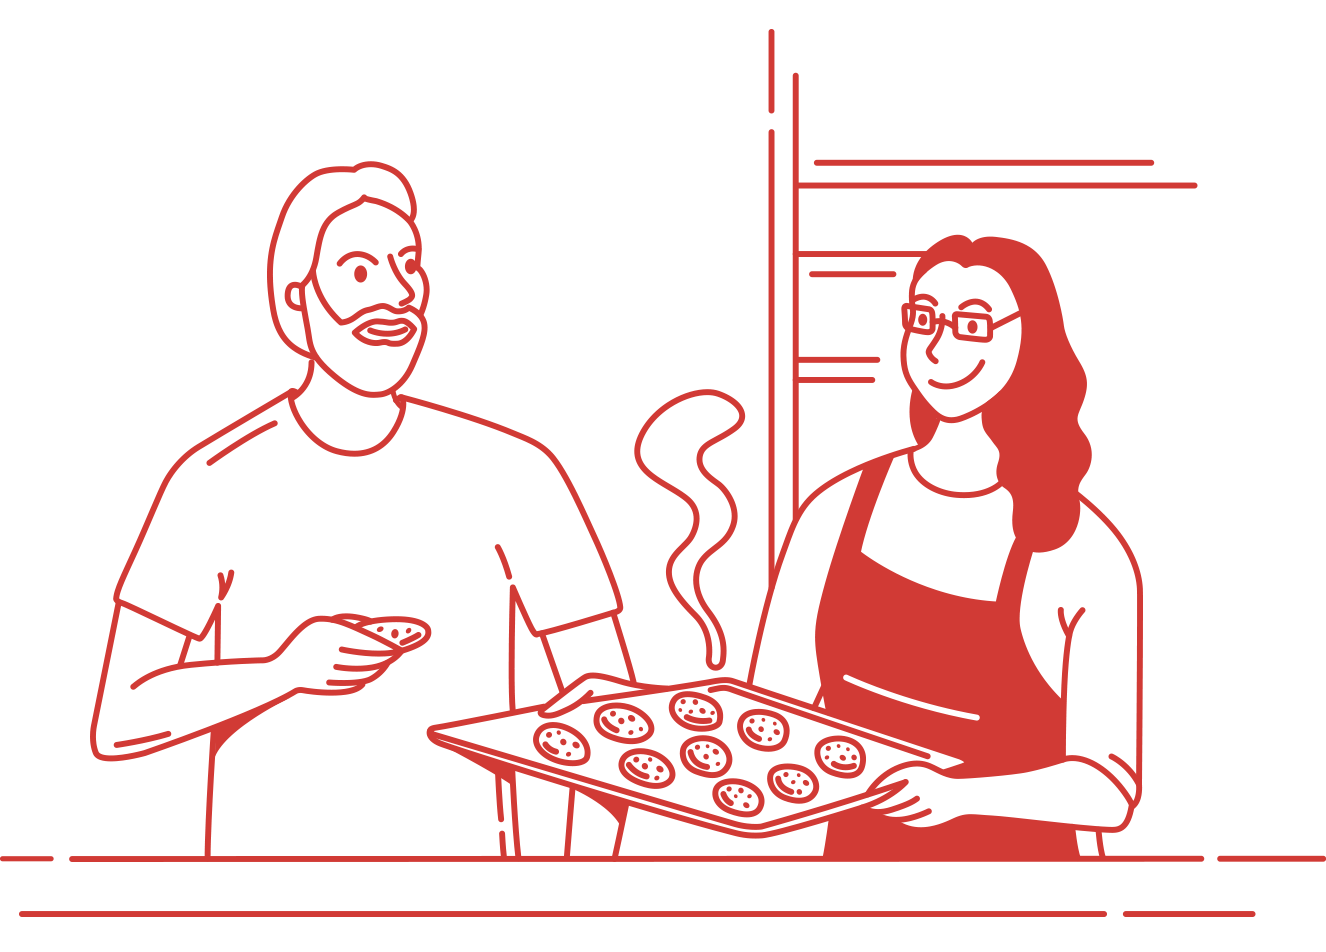 A line illustration of a smiling man in a chef hat, loading dough into a traditional stone oven.